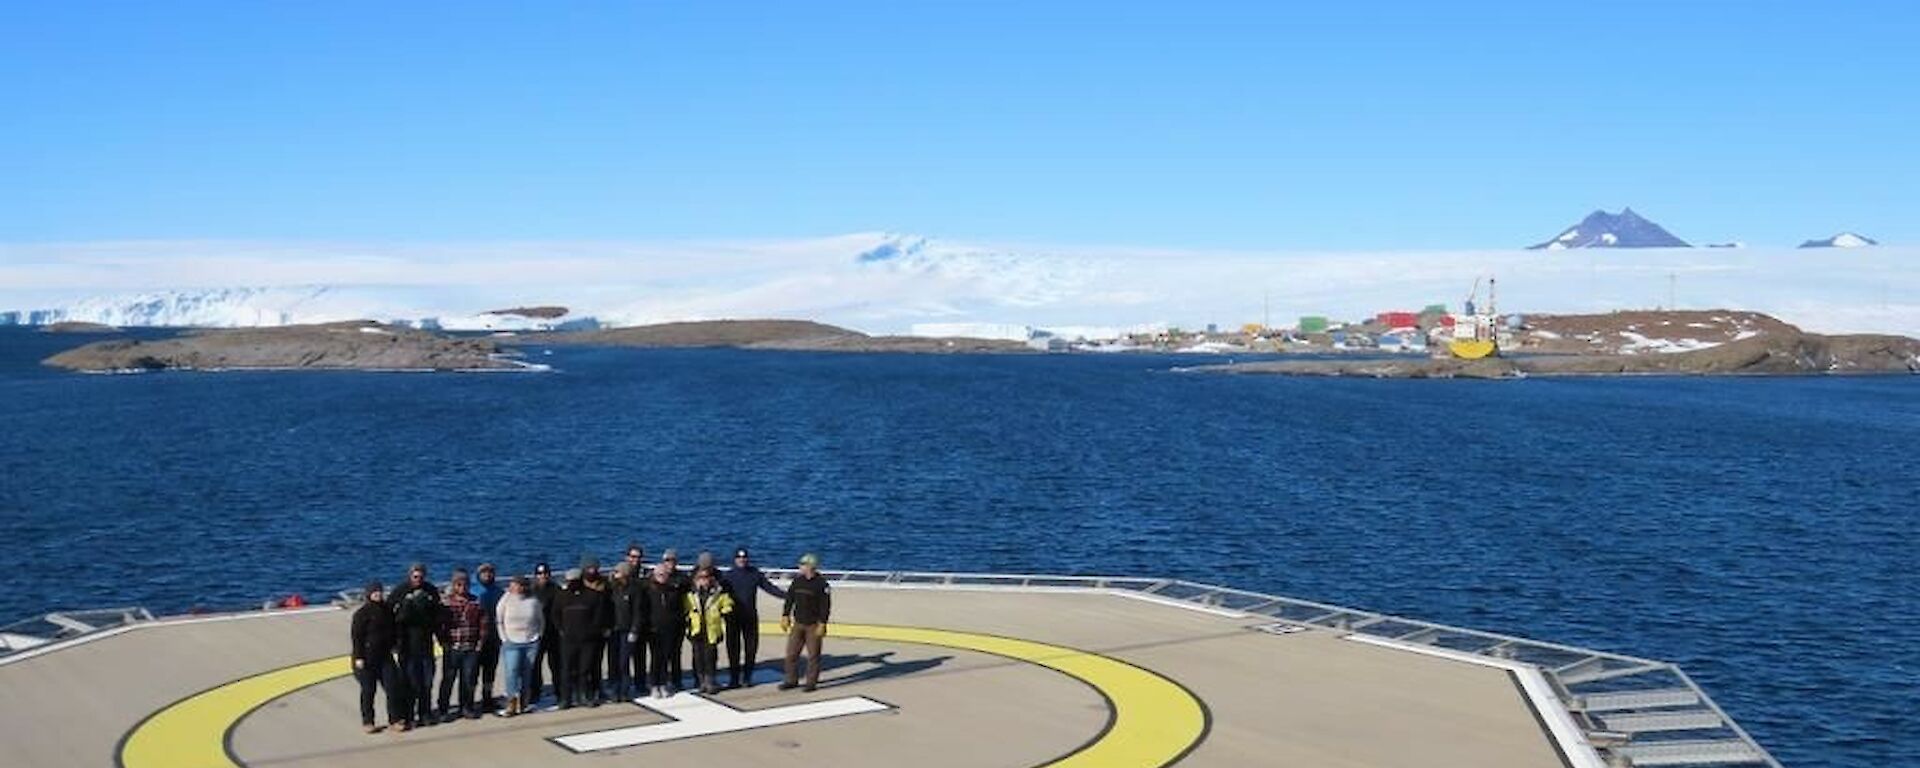 A team of 15 people stand in the middle of a ship's heli-deck with Mawson station in the background